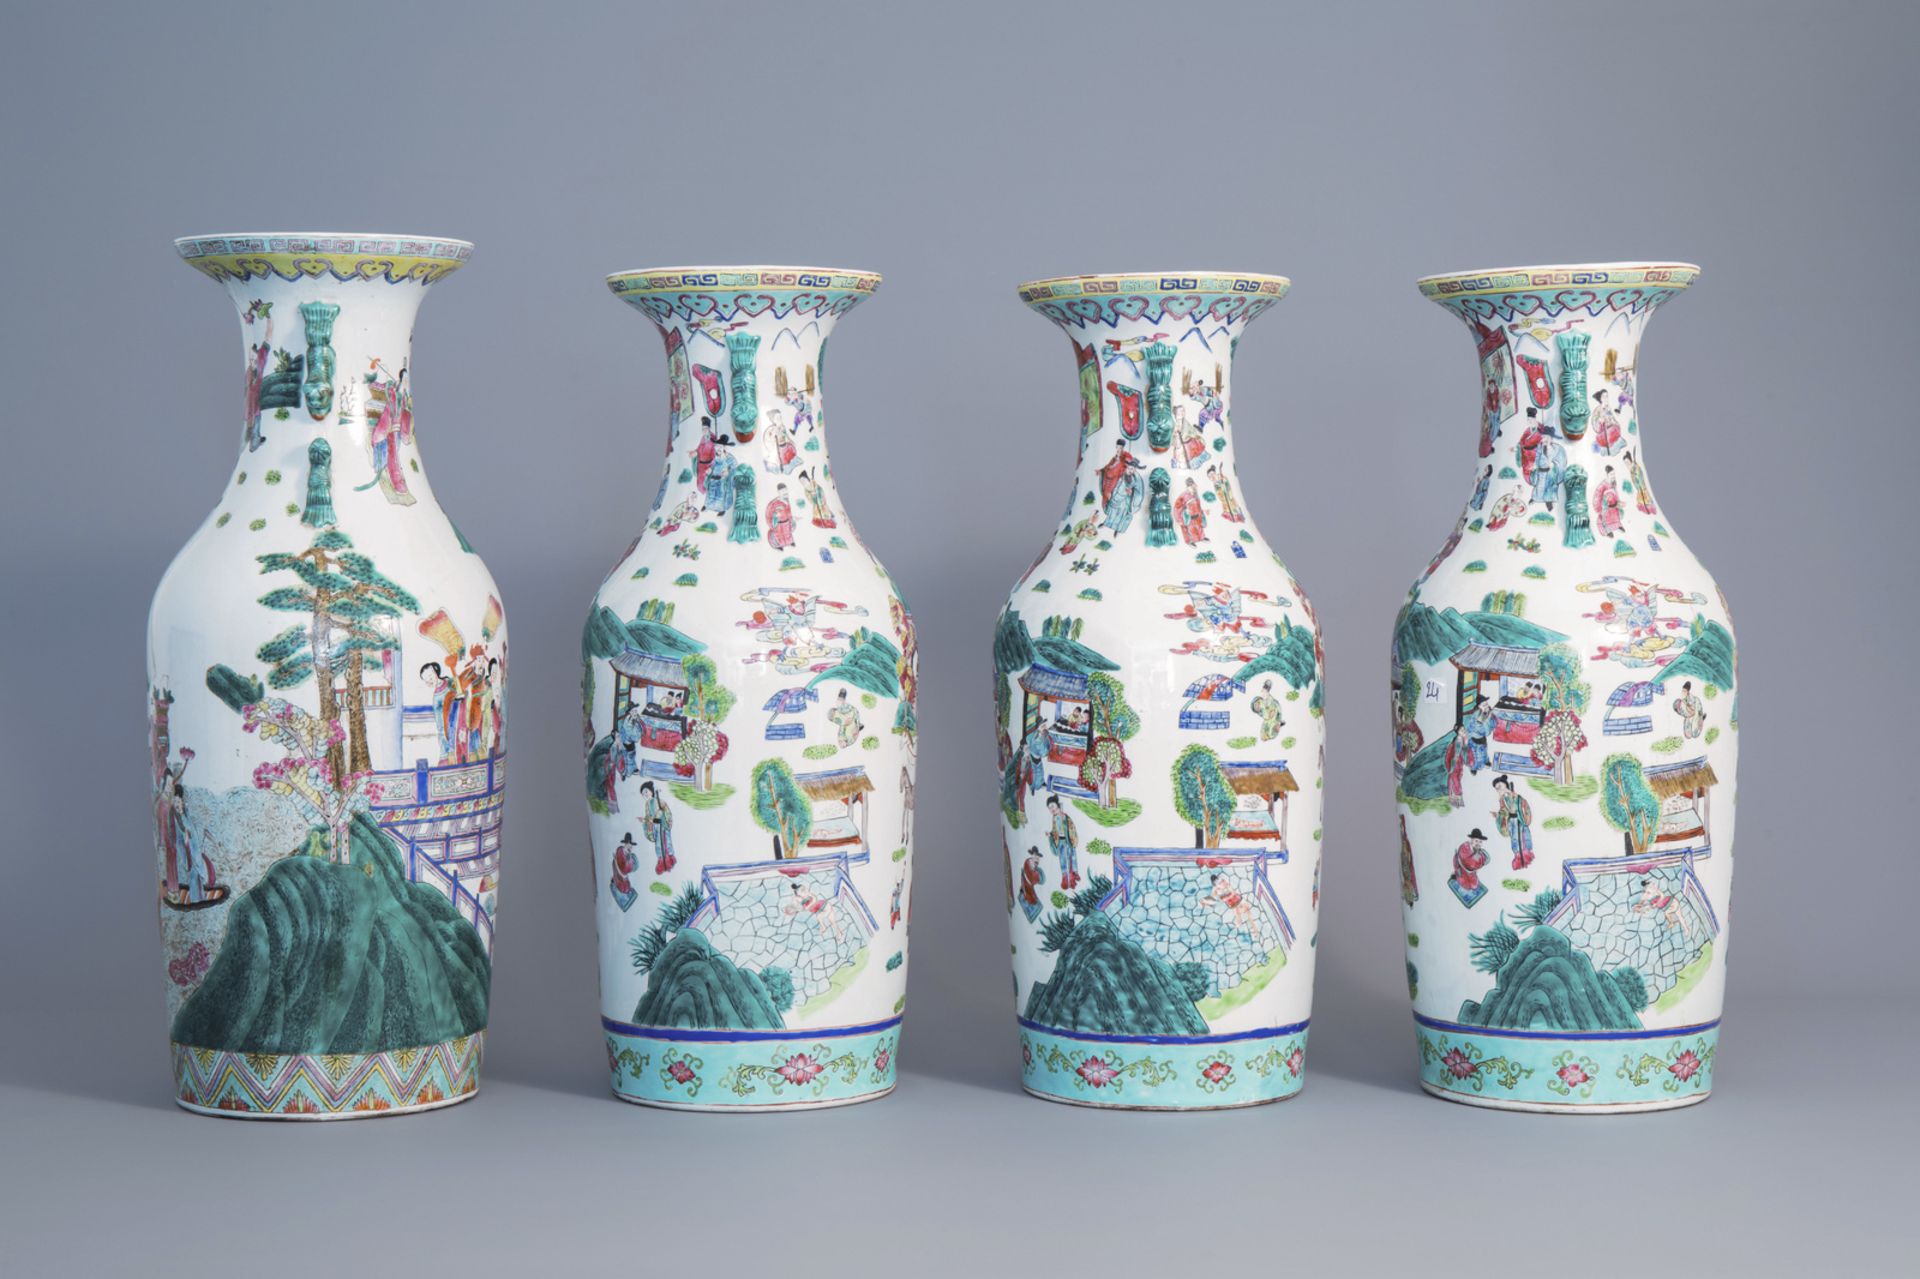 Four Chinese famille rose vases with figurative design all around, 20th C. - Image 2 of 6